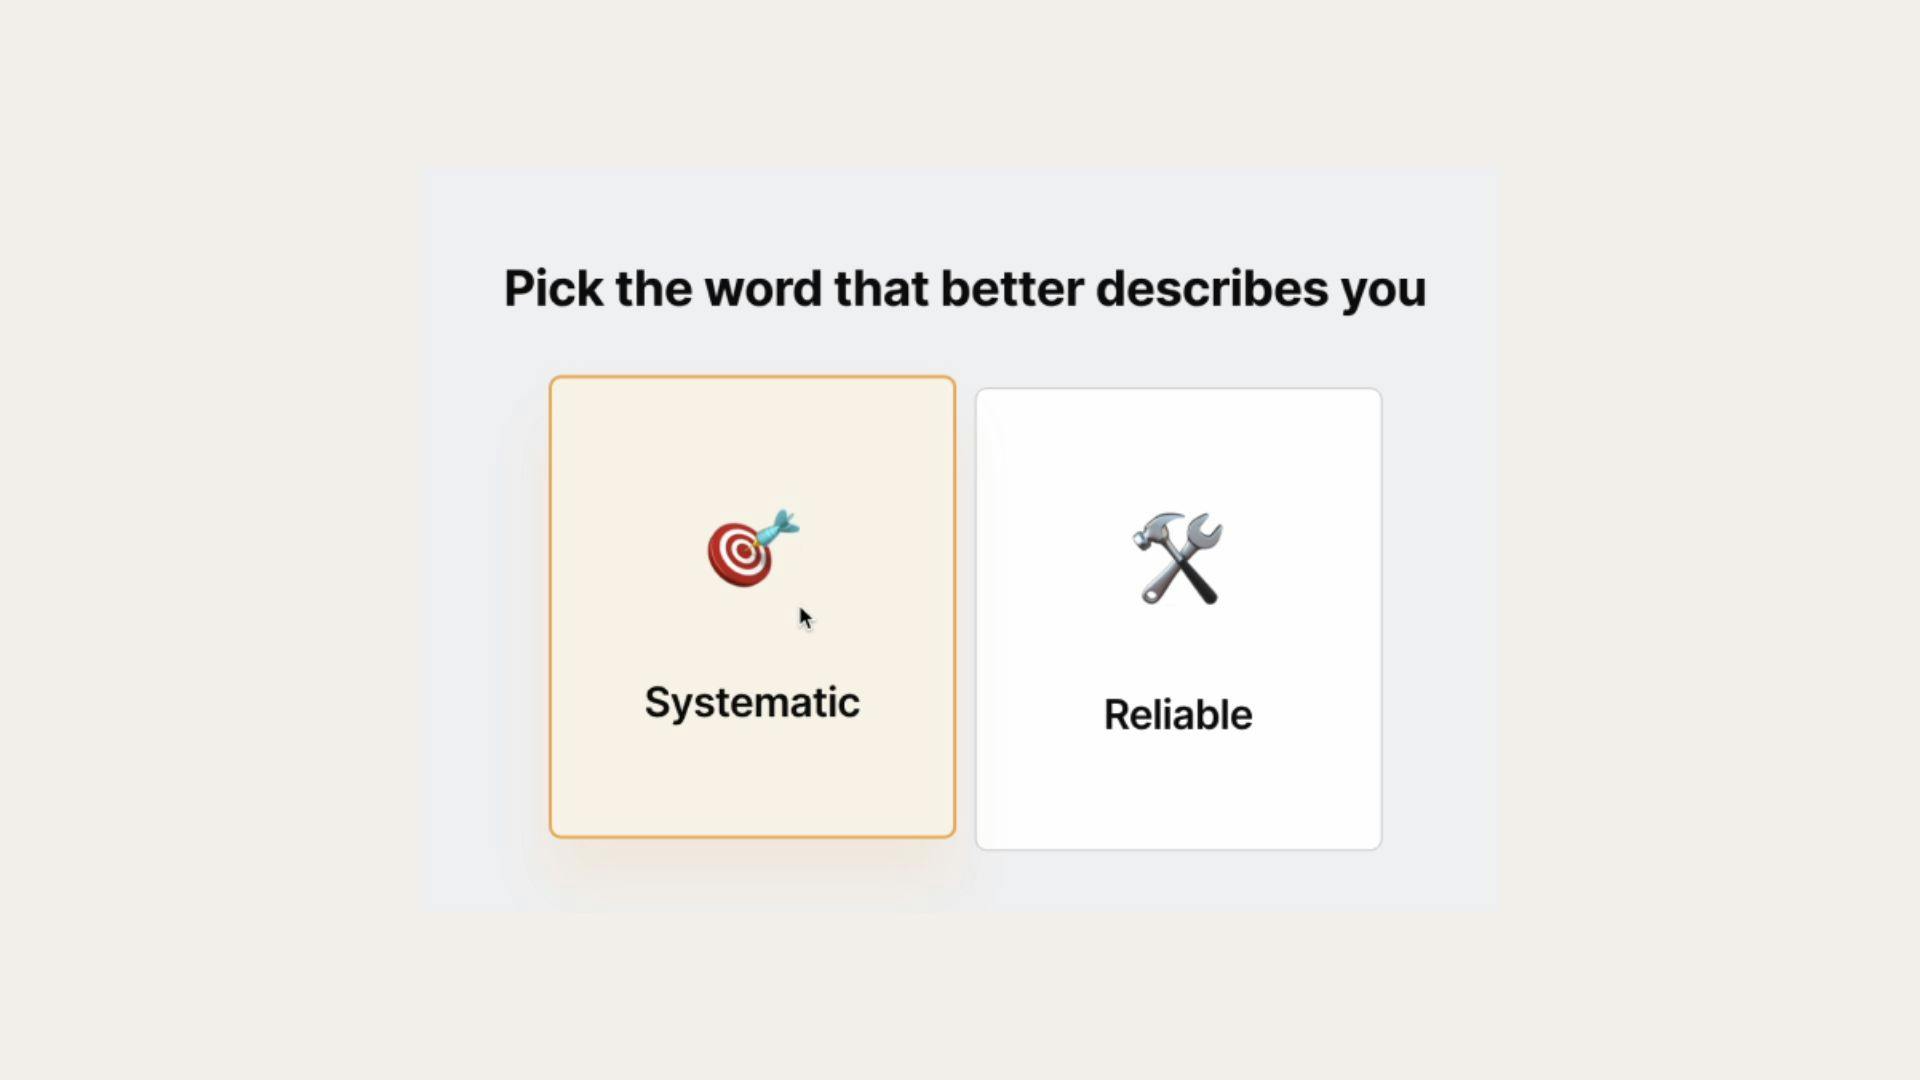 Graphic image showing part of the Happy Assessment that allows users to select descriptors that they feel best represent them.  Shows to words that a hypothetical user can select from "Pick the word that bets describes you: Systematic or Reliable"